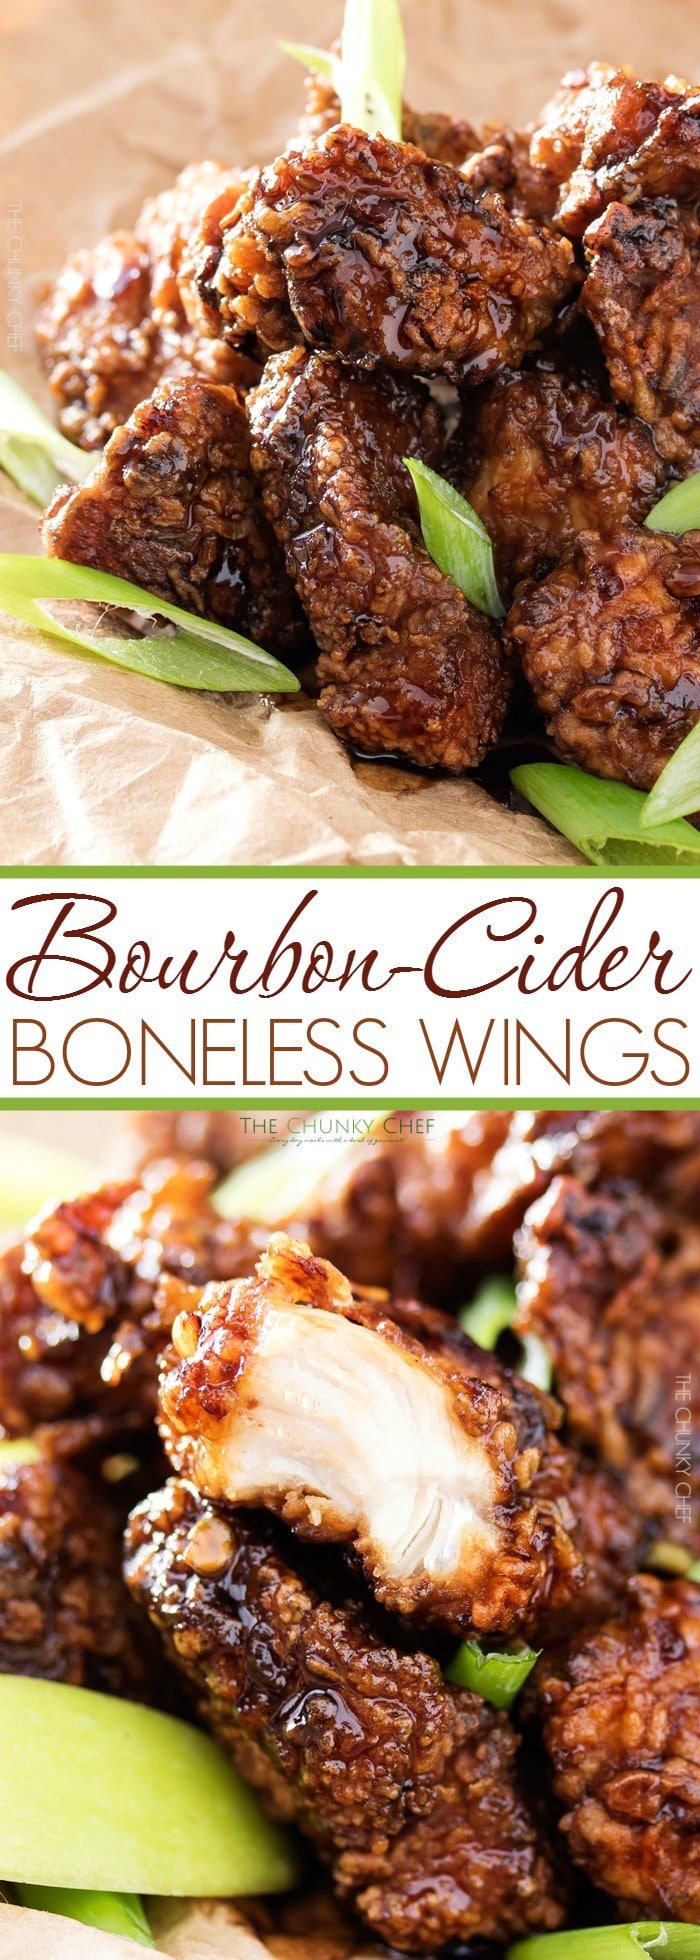 Bourbon Cider Boneless Wings | The ultimate boneless wings, marinated in buttermilk, fried until crispy, and tossed in a mouthwatering spicy bourbon apple cider sauce! | http://thechunkychef.com